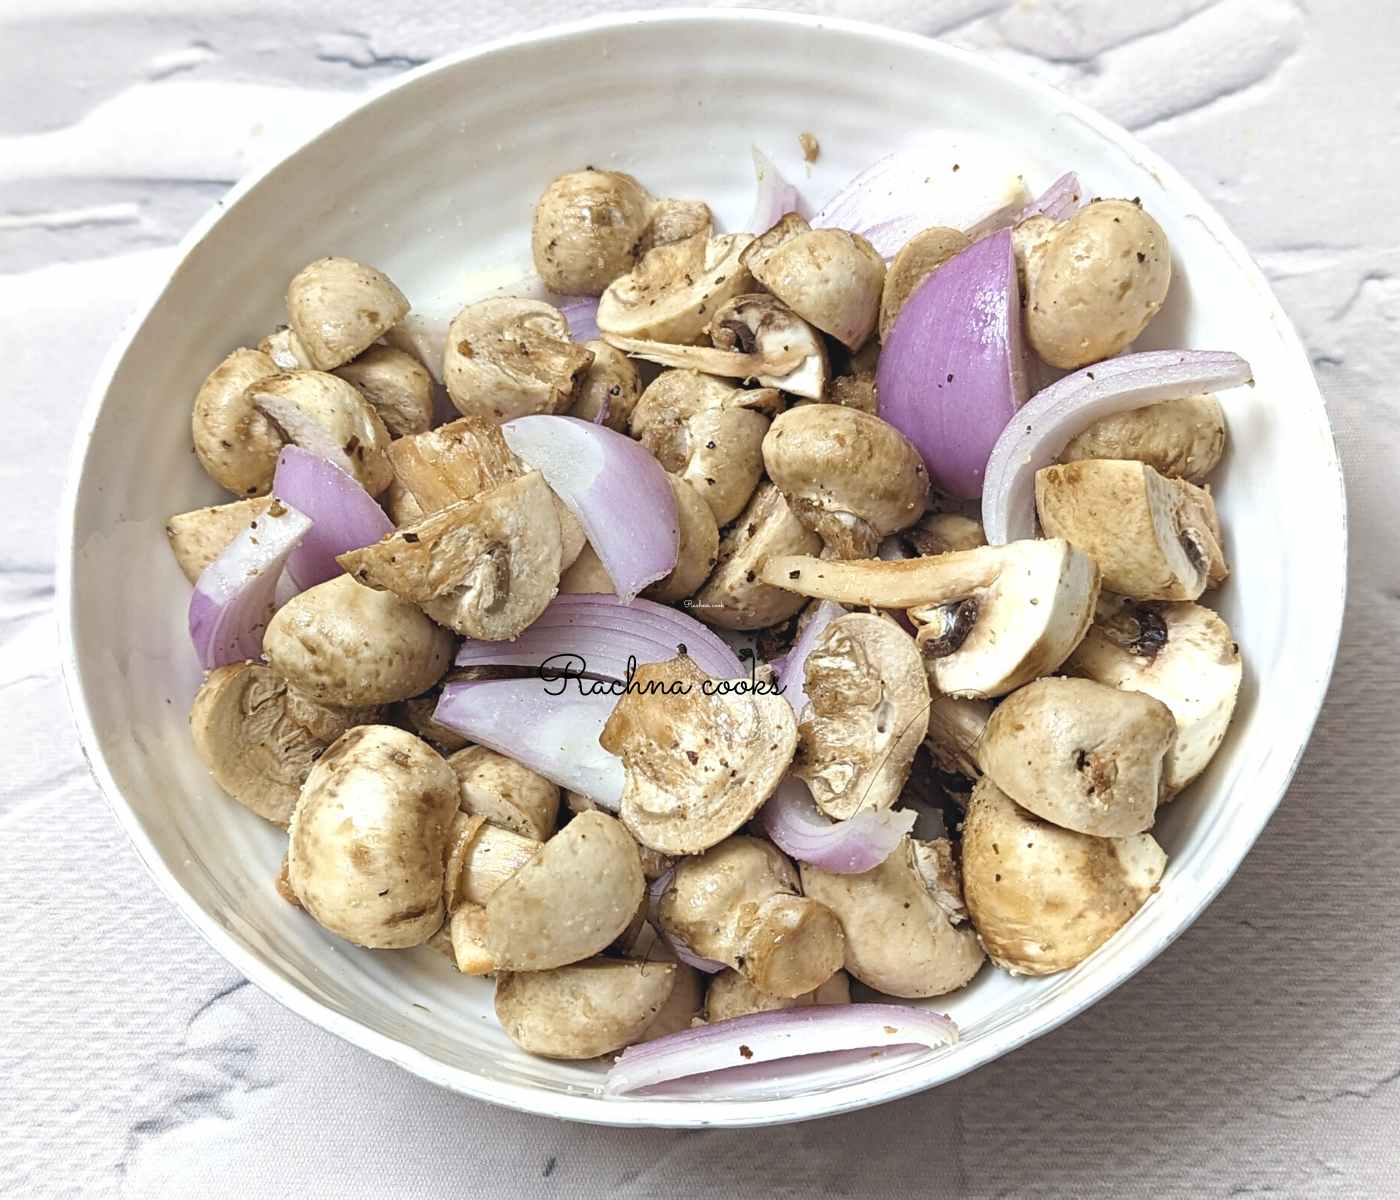 Chopped mushroom and sliced onion in a bowl